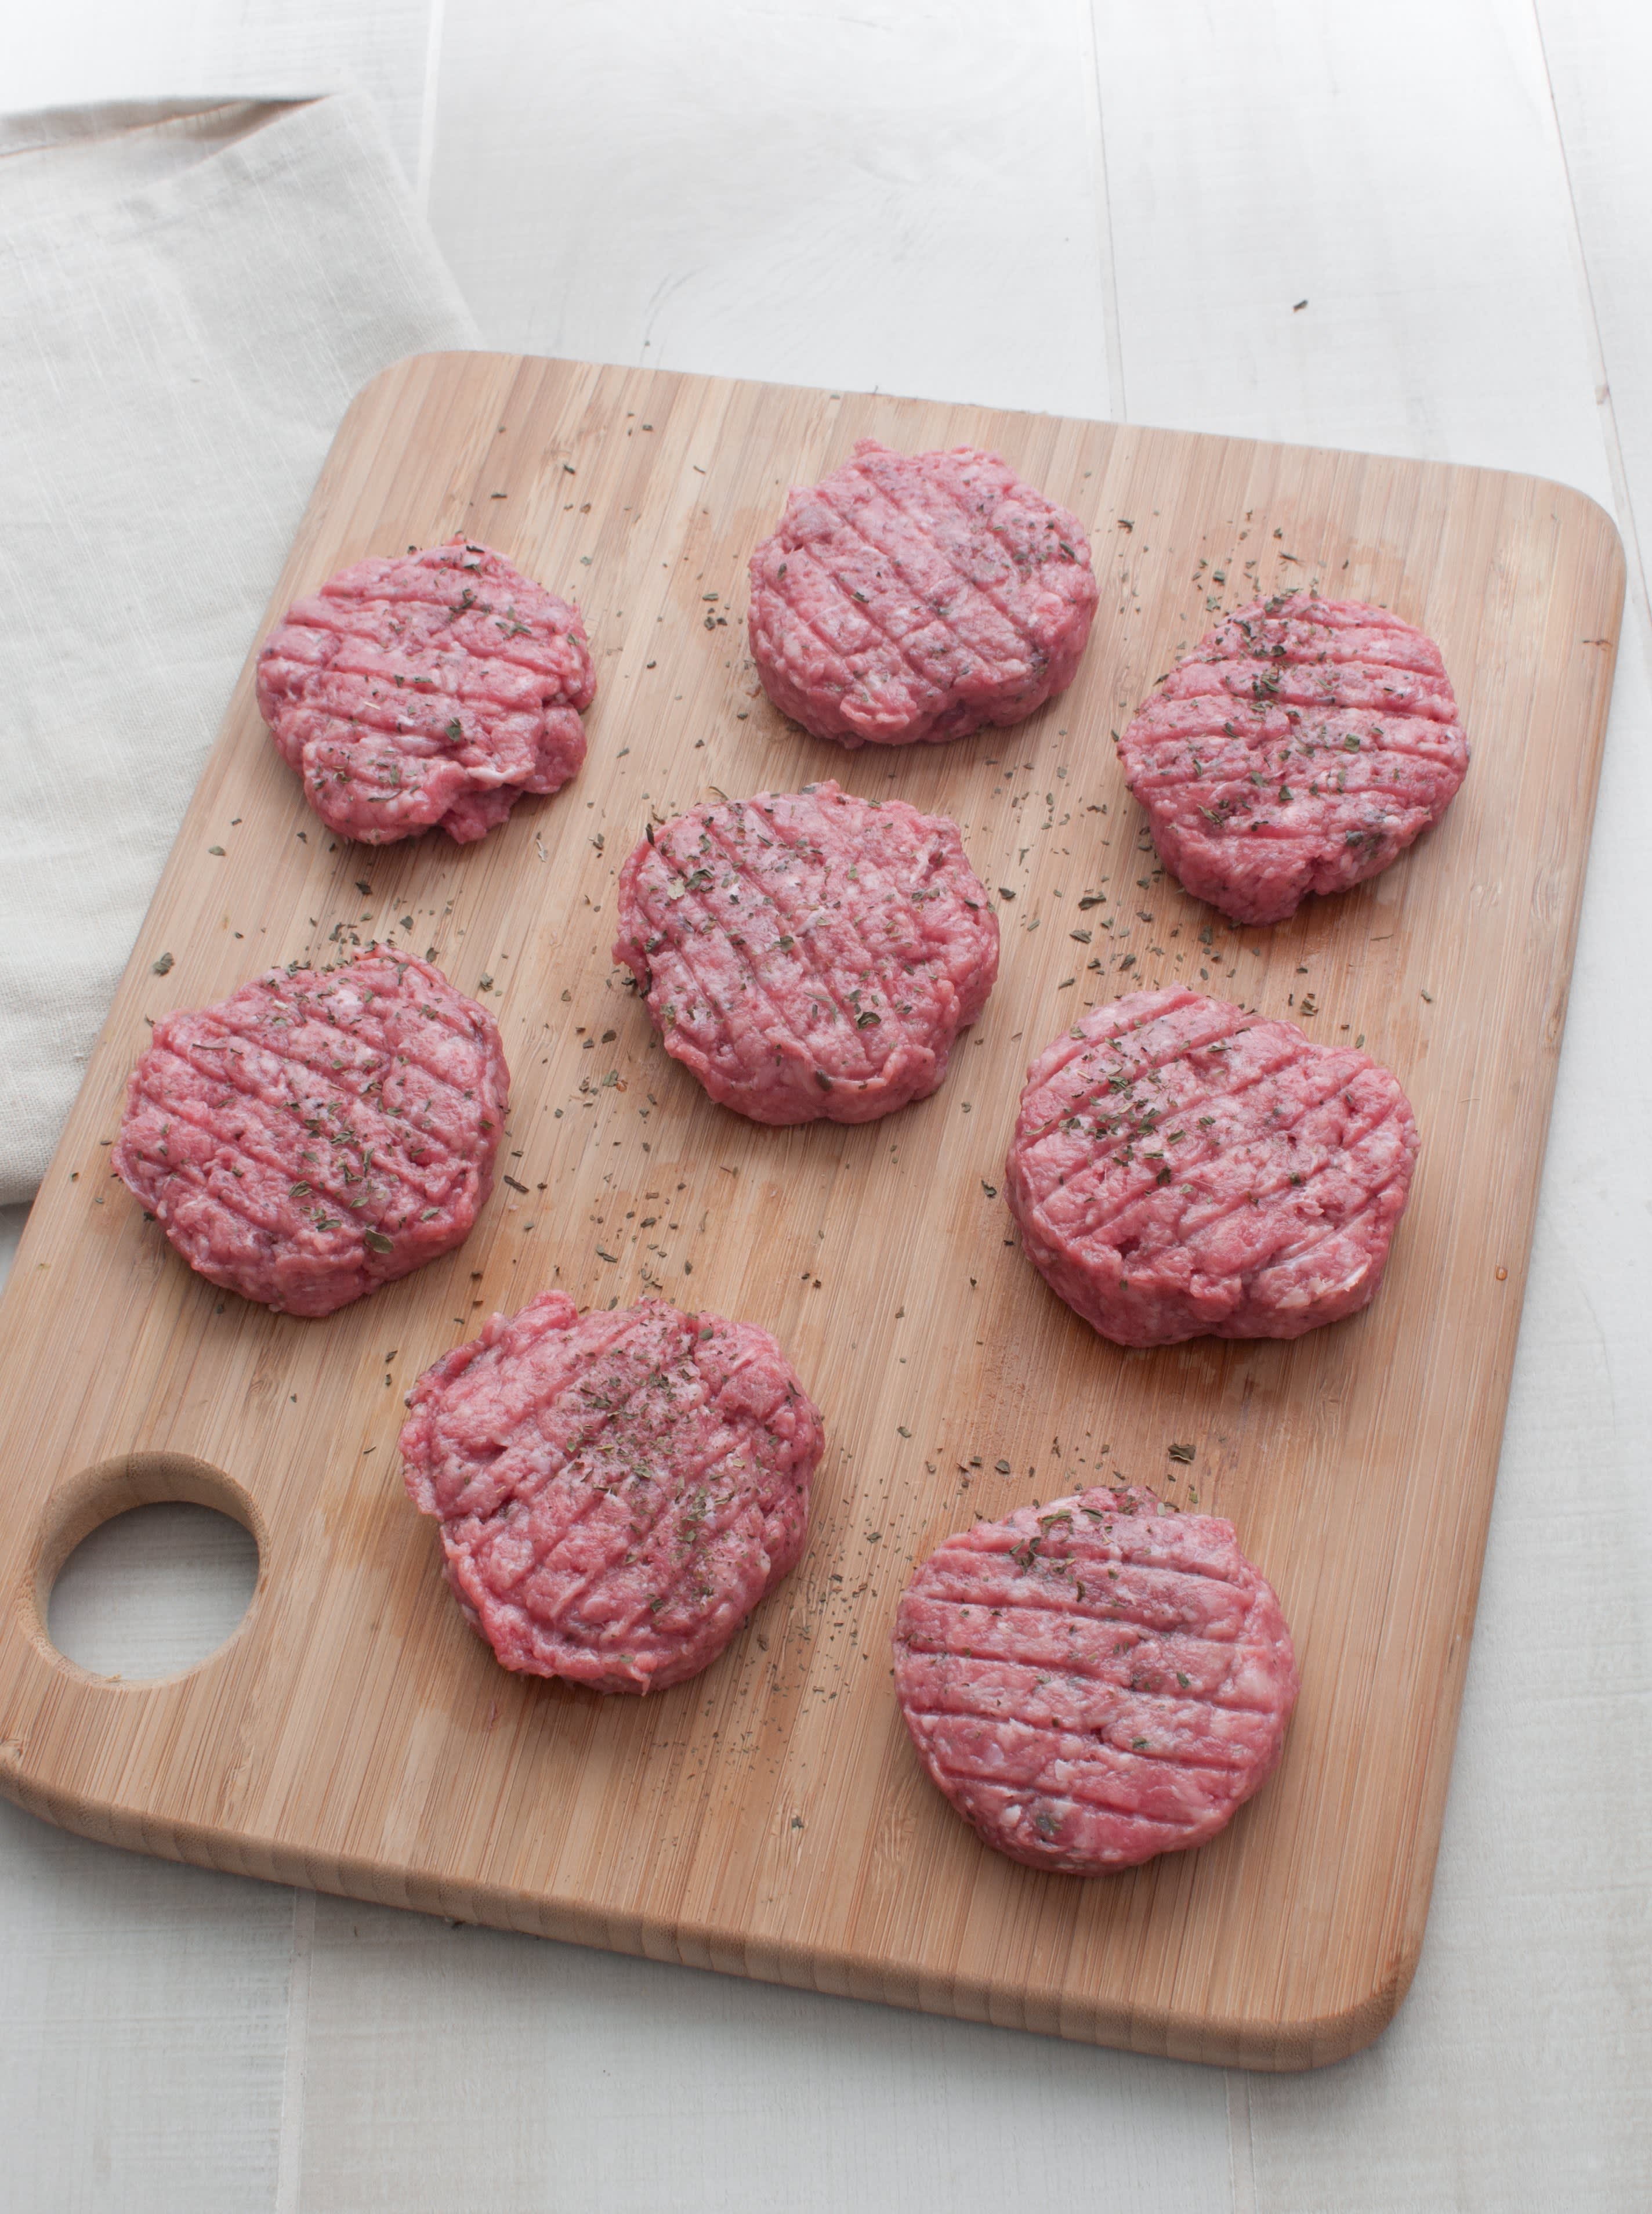 The Best Ground Beef for Great Burgers | Kitchn